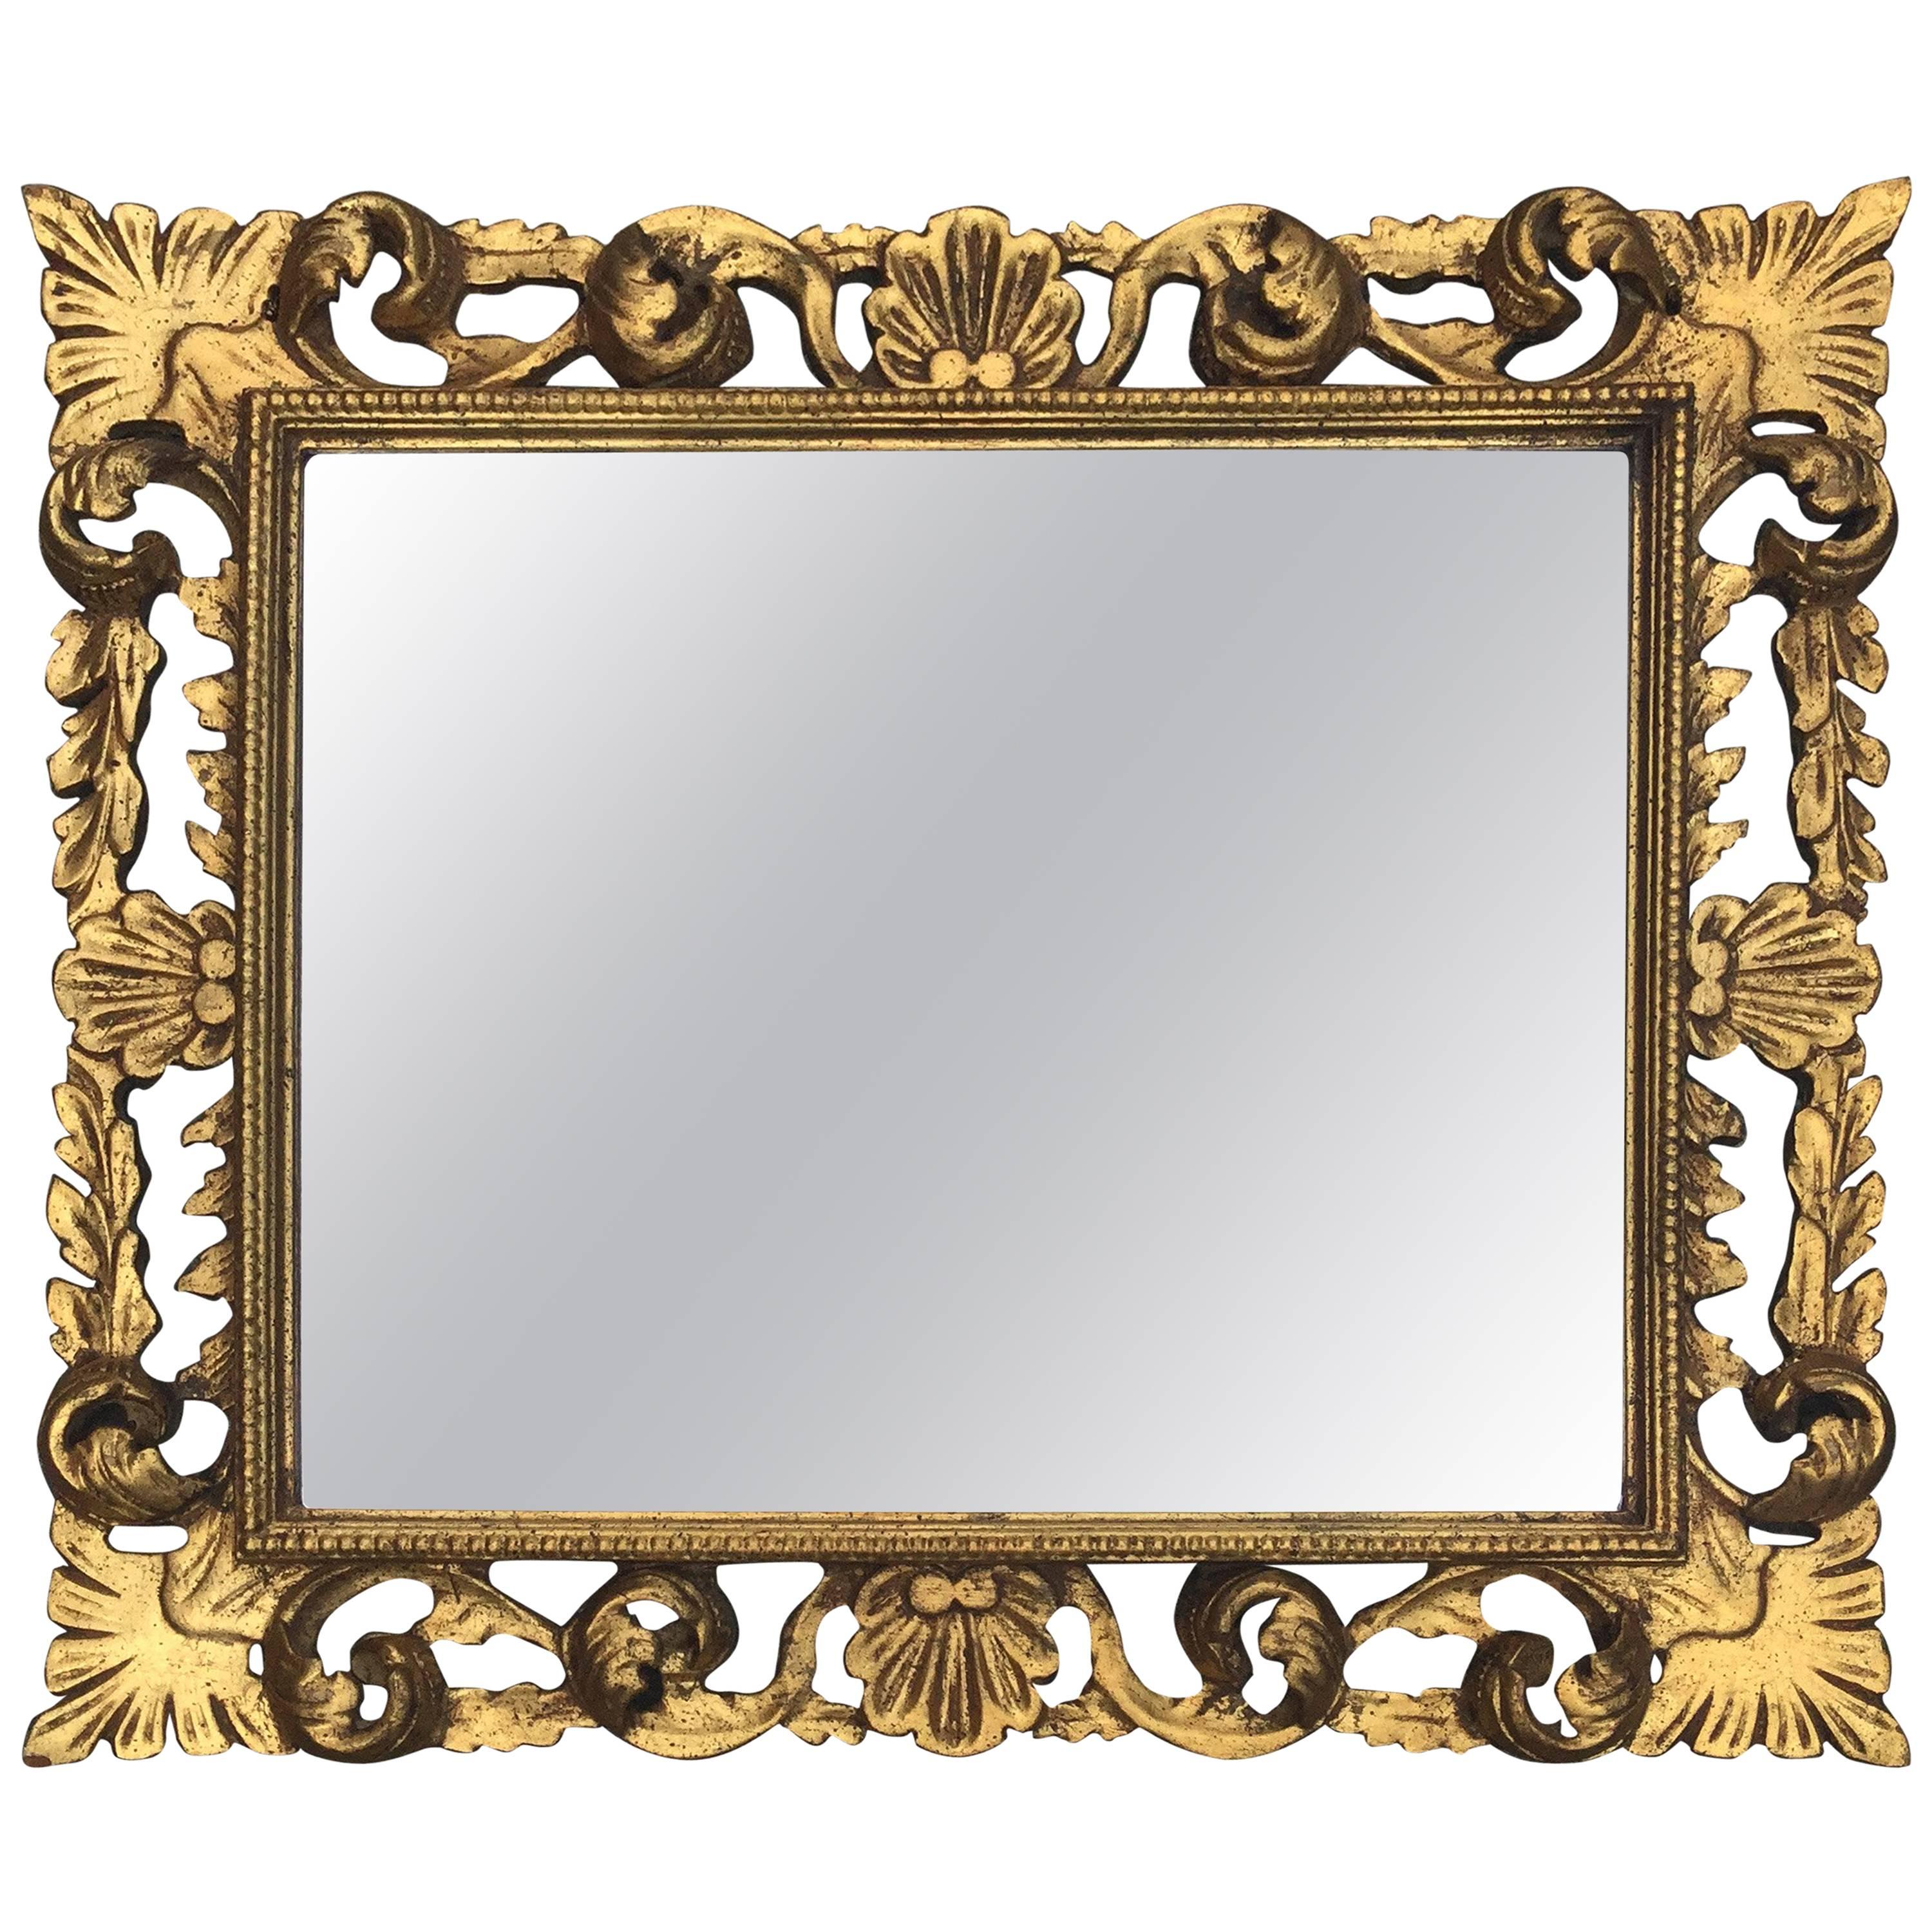 Style Neoclassical Revival Giltwood Mirror, circa 1950